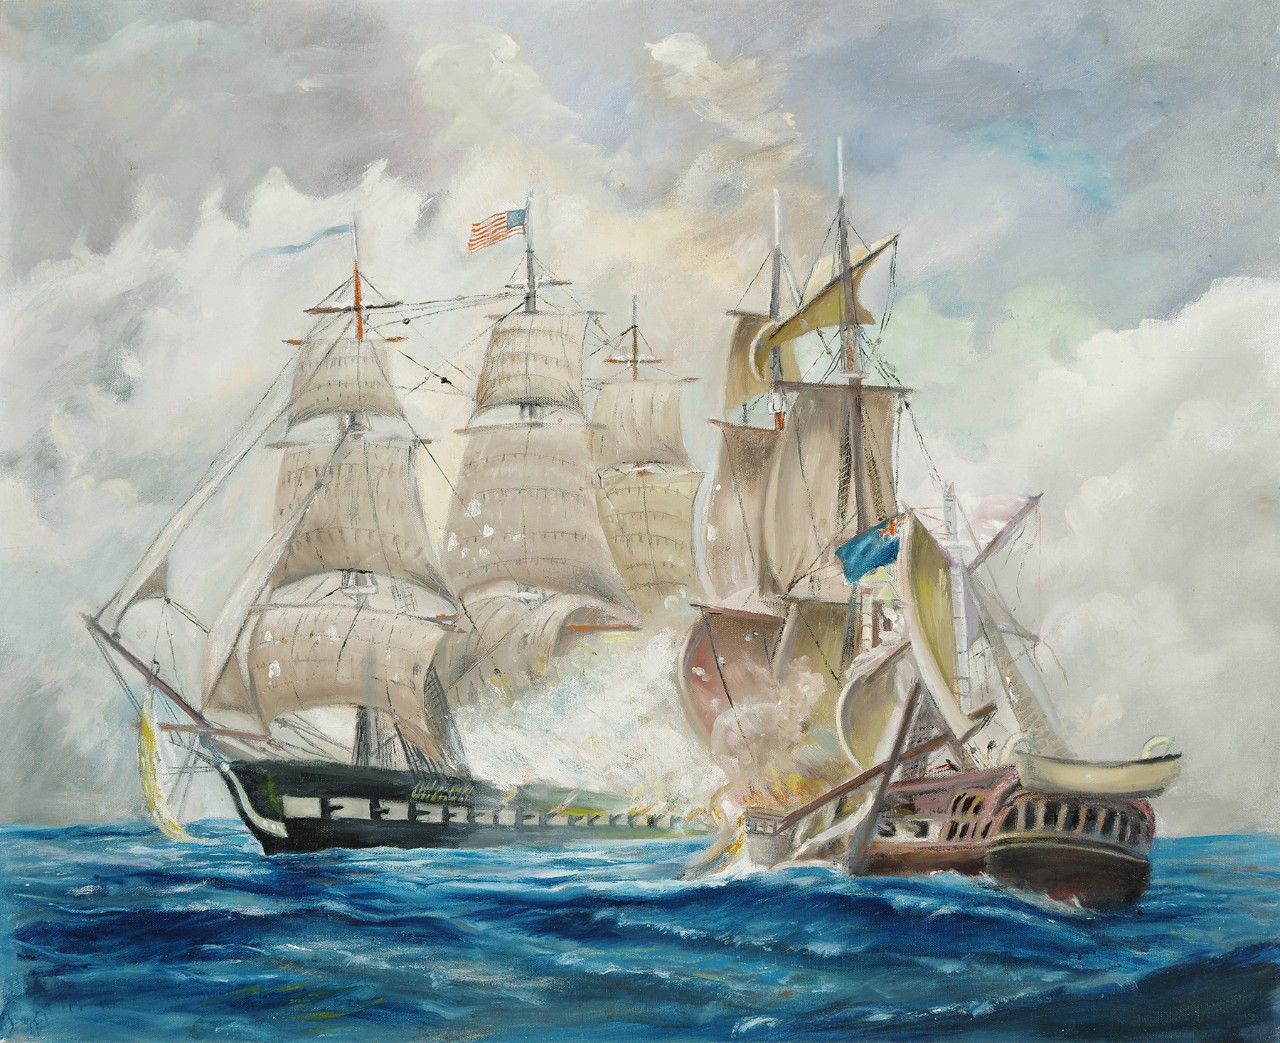 The British ship has its bow towards the American ship which is firing its canons